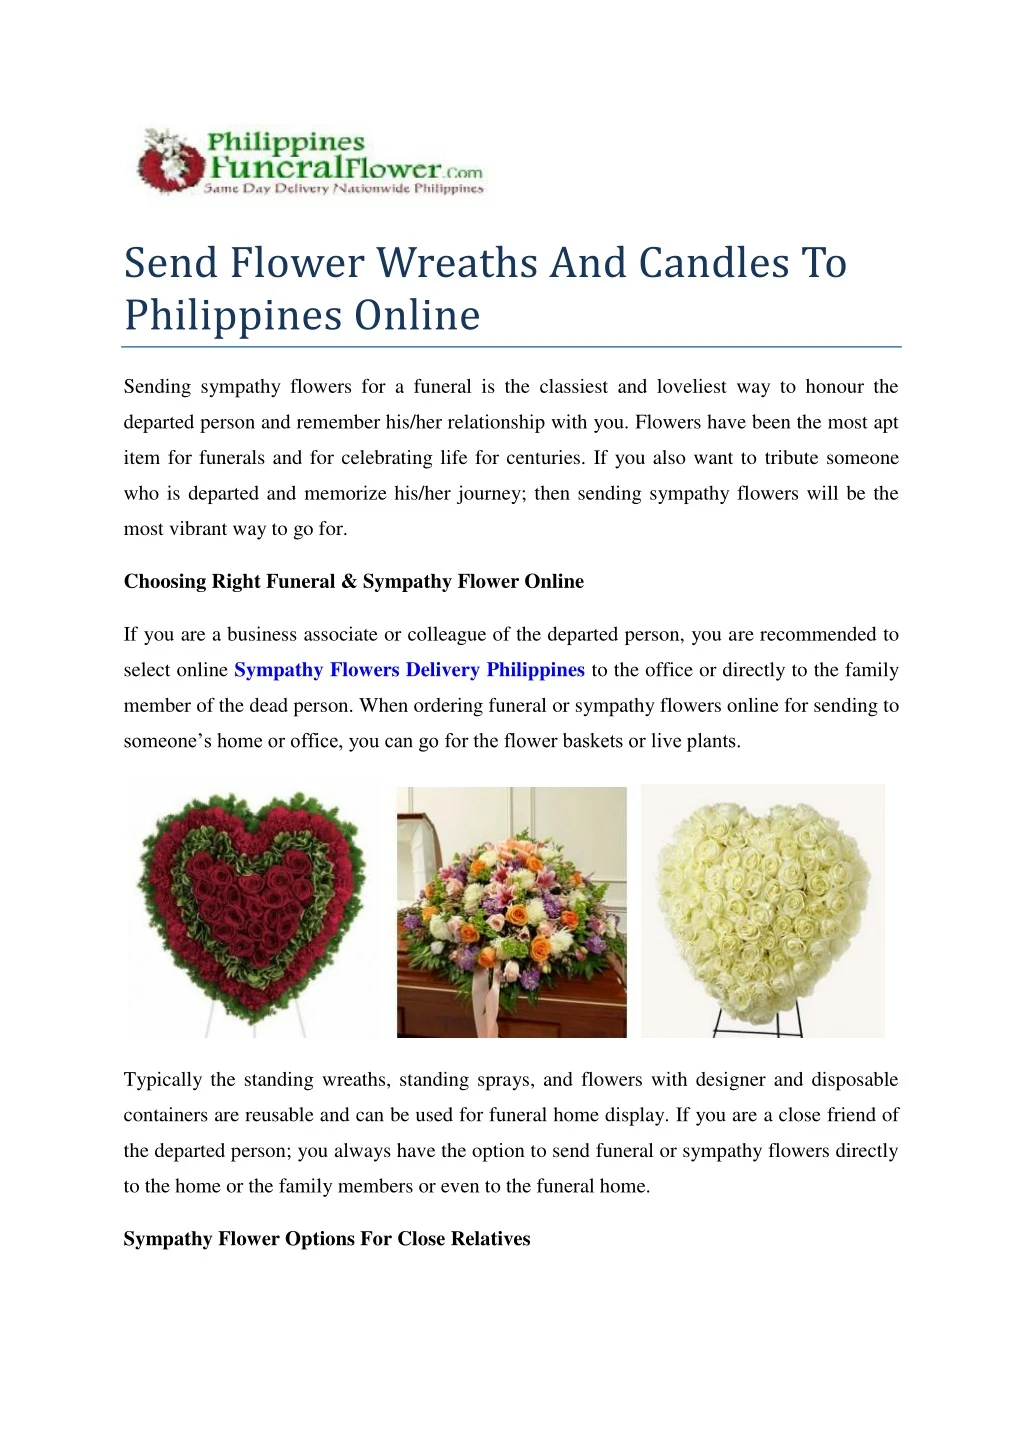 send flower wreaths and candles to philippines